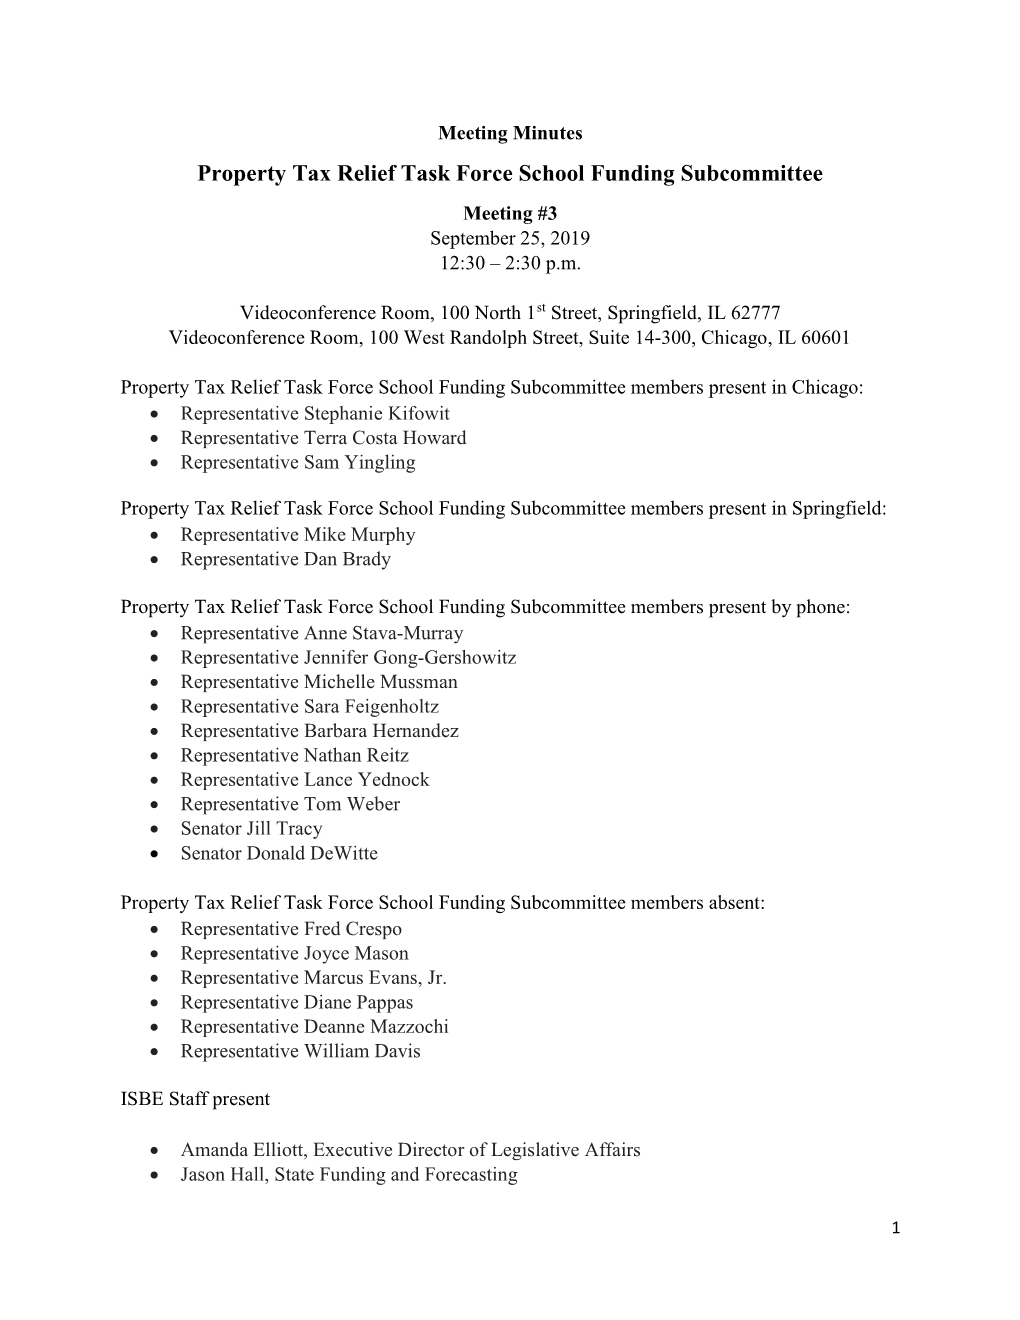 Property Tax Relief Task Force School Funding Subcommittee Meeting #3 September 25, 2019 12:30 – 2:30 P.M